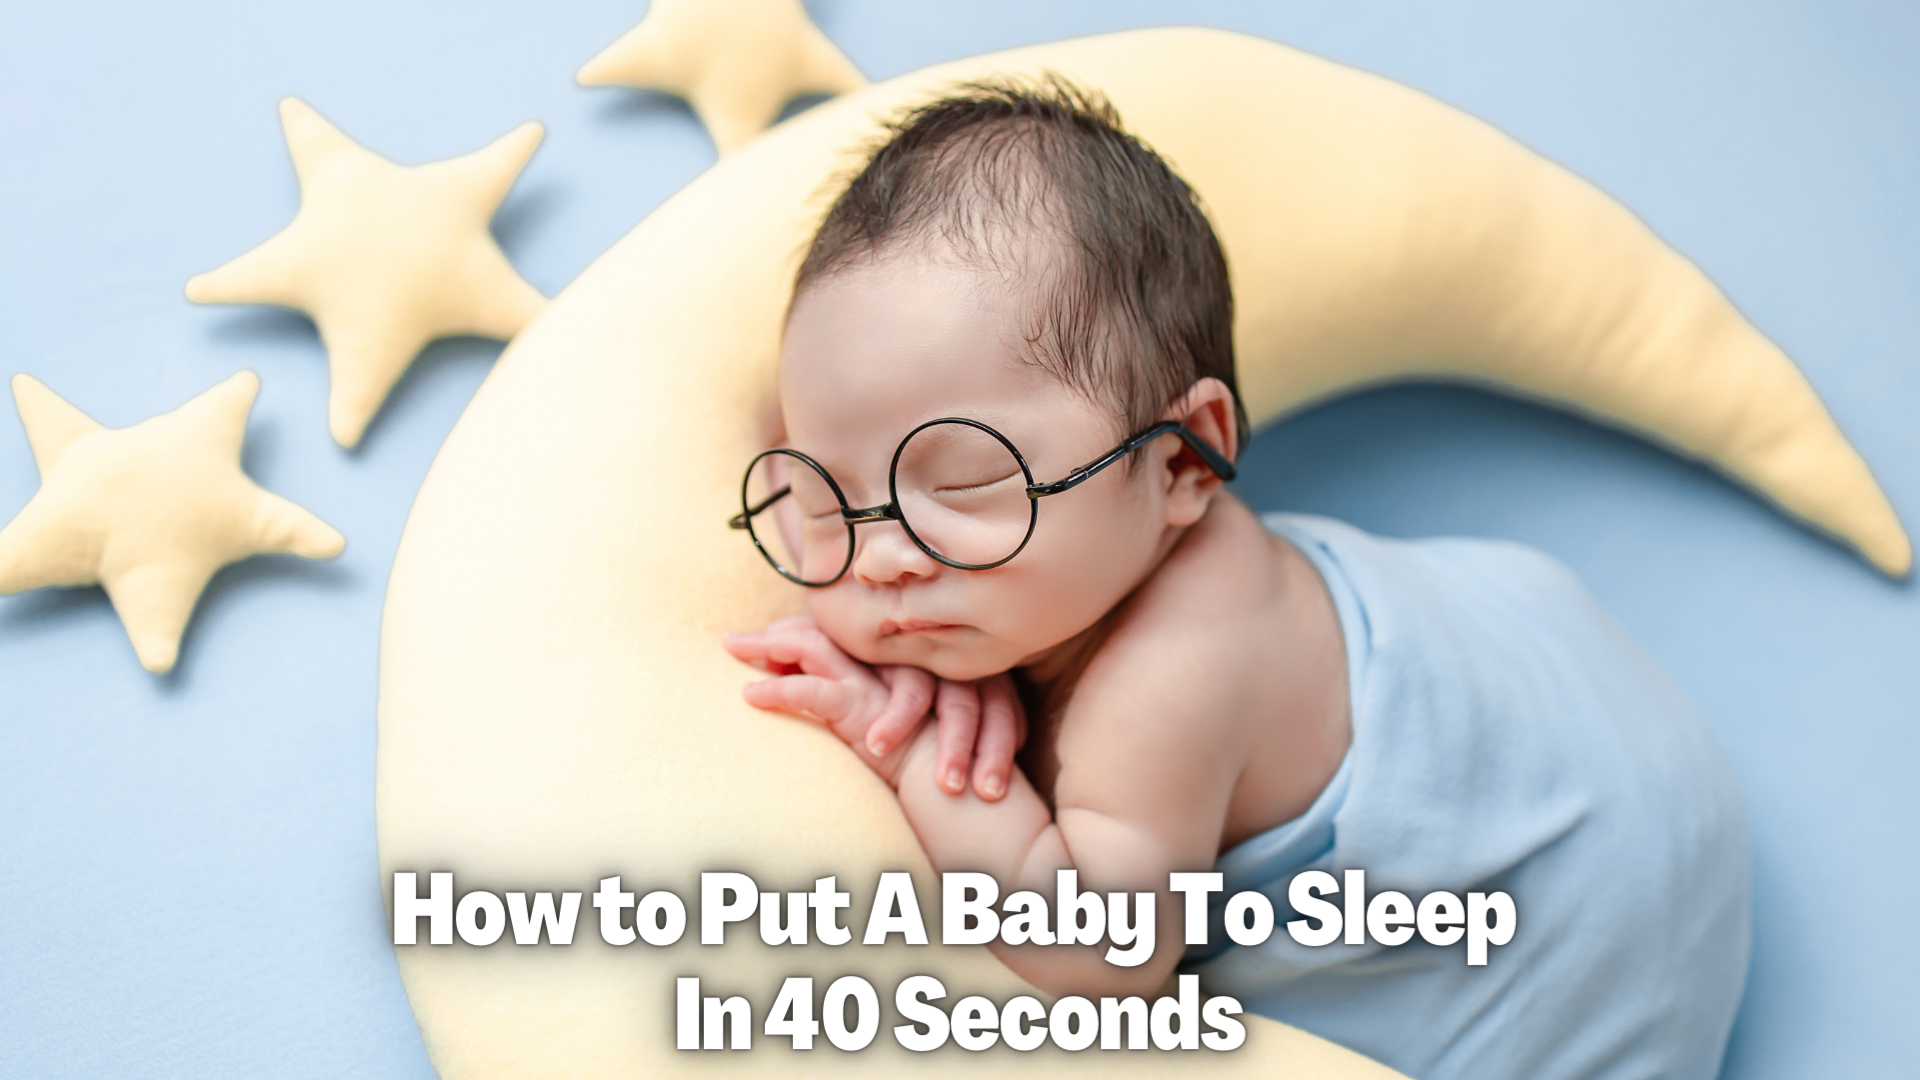 How to Put A Baby To Sleep In 40 Seconds